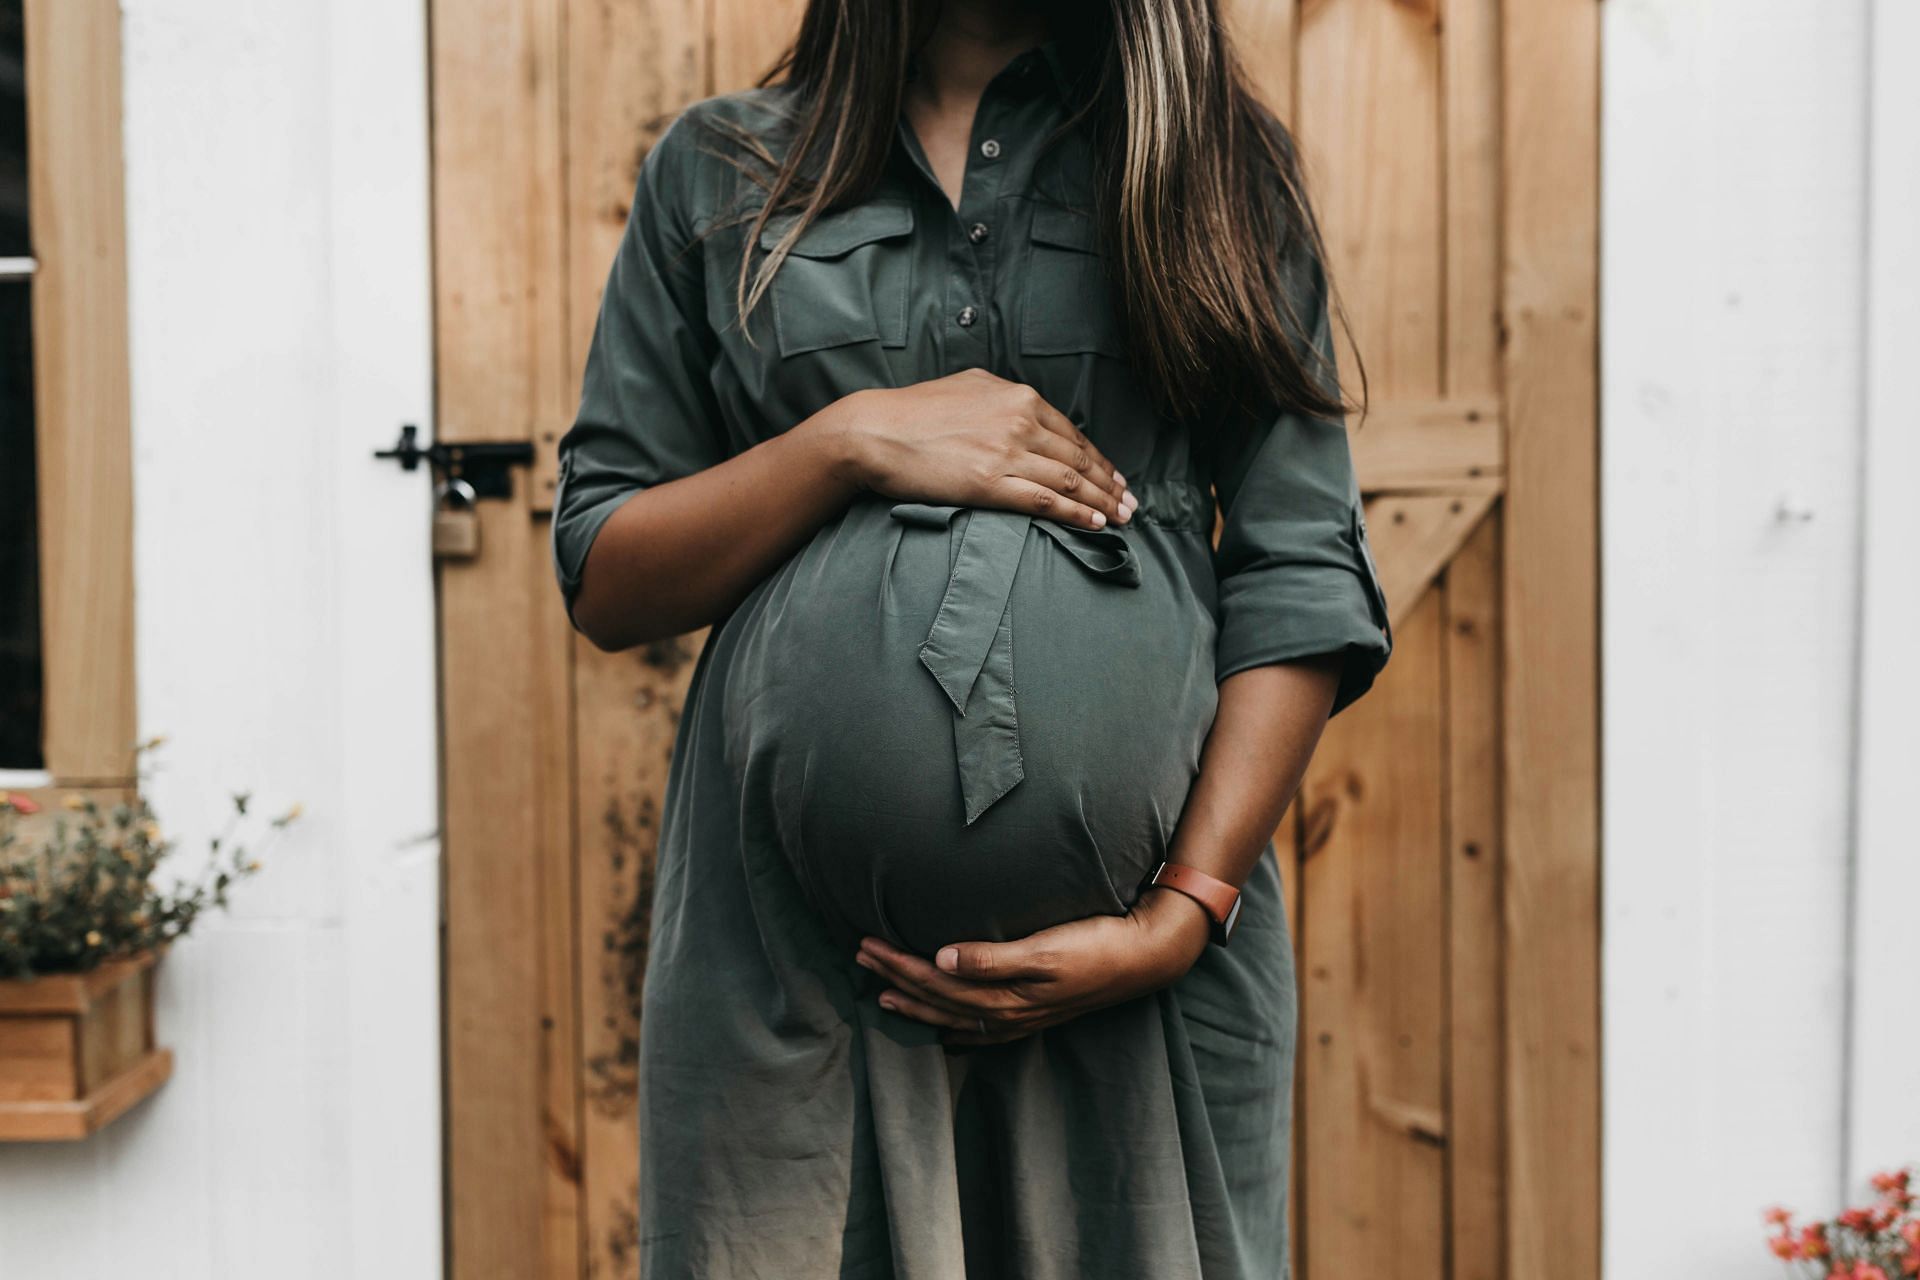 Are you hiding your pregnancy stretch marks? (Image by Camylla Battani/Unsplash)